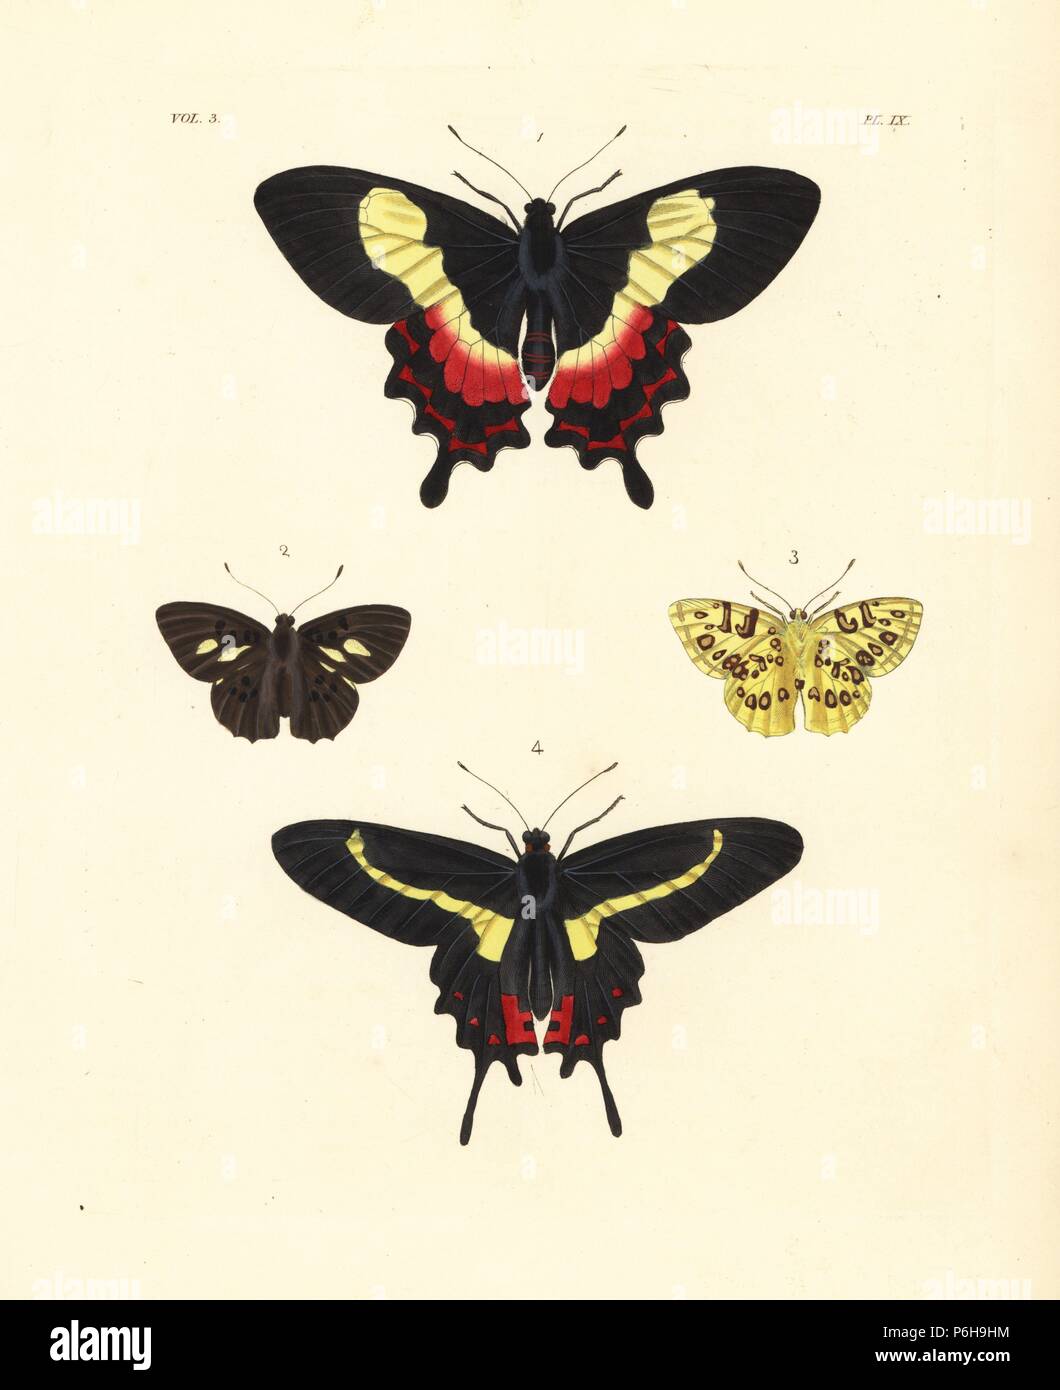 Fluminense swallowtail, Parides ascanius, vulnerable 1, Anteros acheus, upper side 2, under side 3, and Parides agavus swallowtail butterfly 4. Handcoloured lithograph from John O. Westwood's new edition of Dru Drury's 'Illustrations of Exotic Entomology,' Bohn, London, 1837. Stock Photo